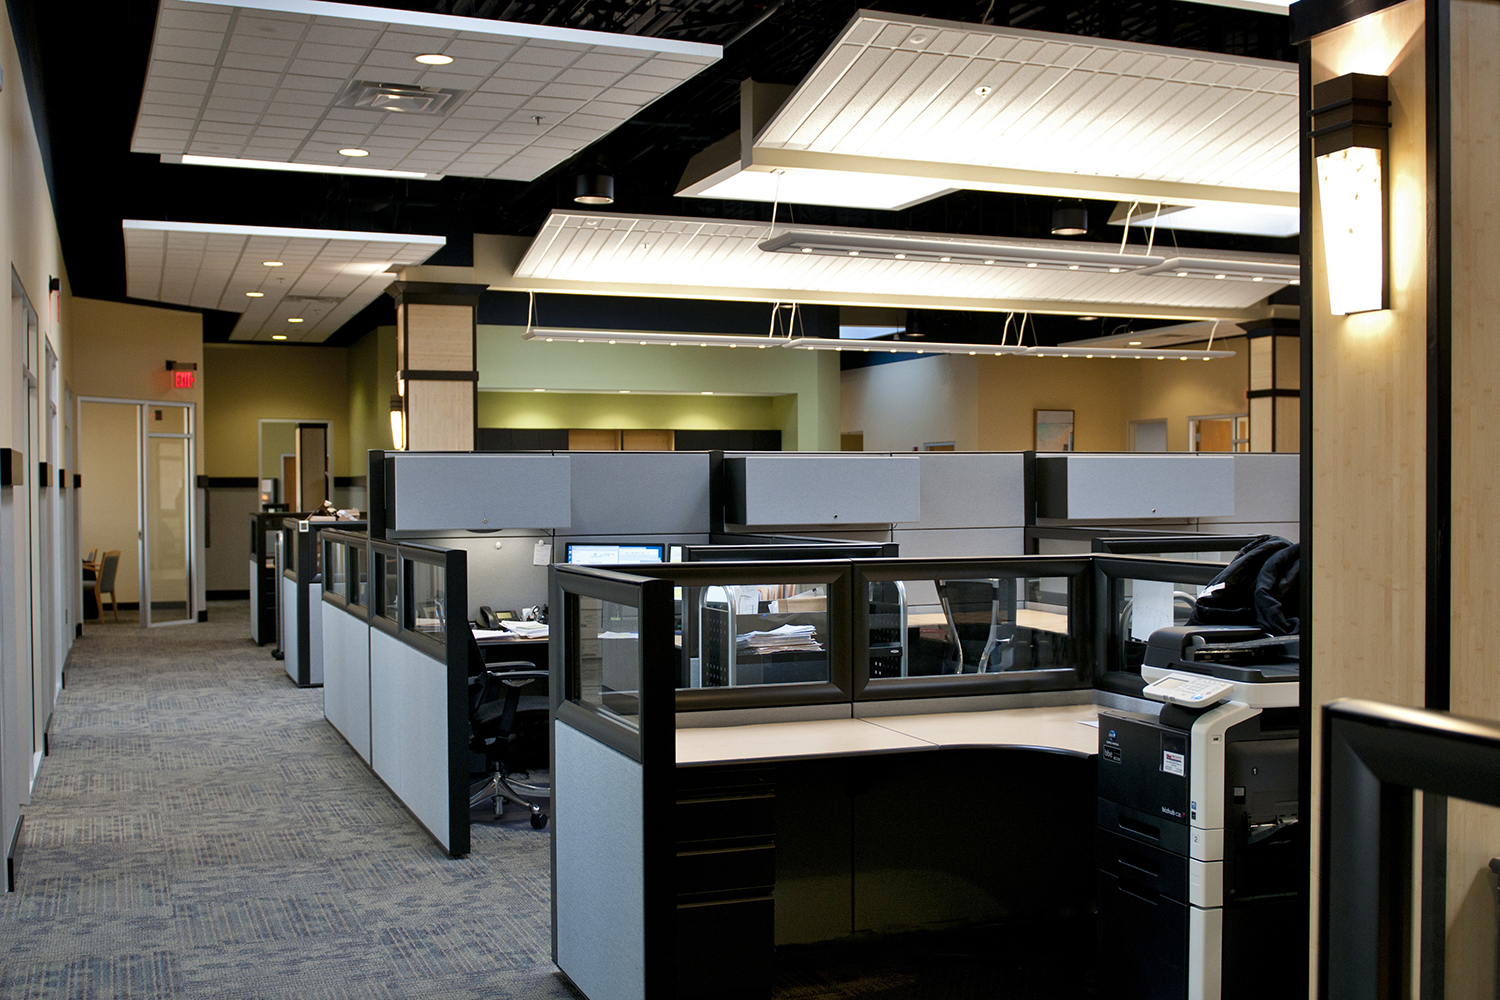 Wedge sconces illuminate a modern office lighting design, shown along the wall of an open cubicle area with an exposed ceiling.